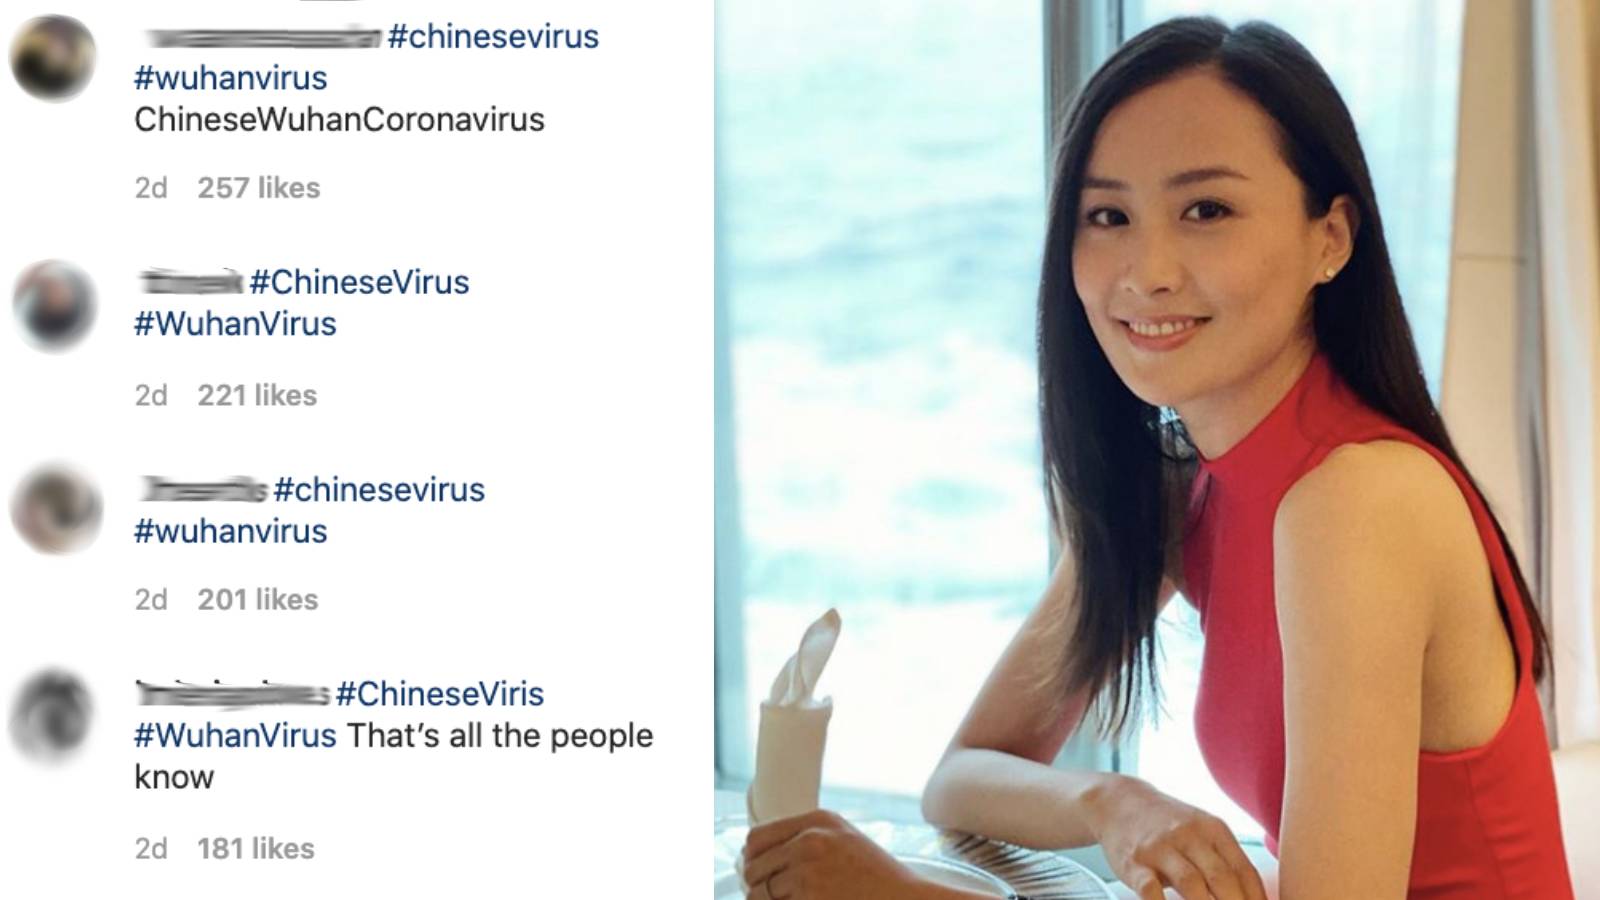 Netizens Bombard Fala Chen With Negative Comments After She Criticises Donald Trump For Using ‘Chinese Virus’ Label